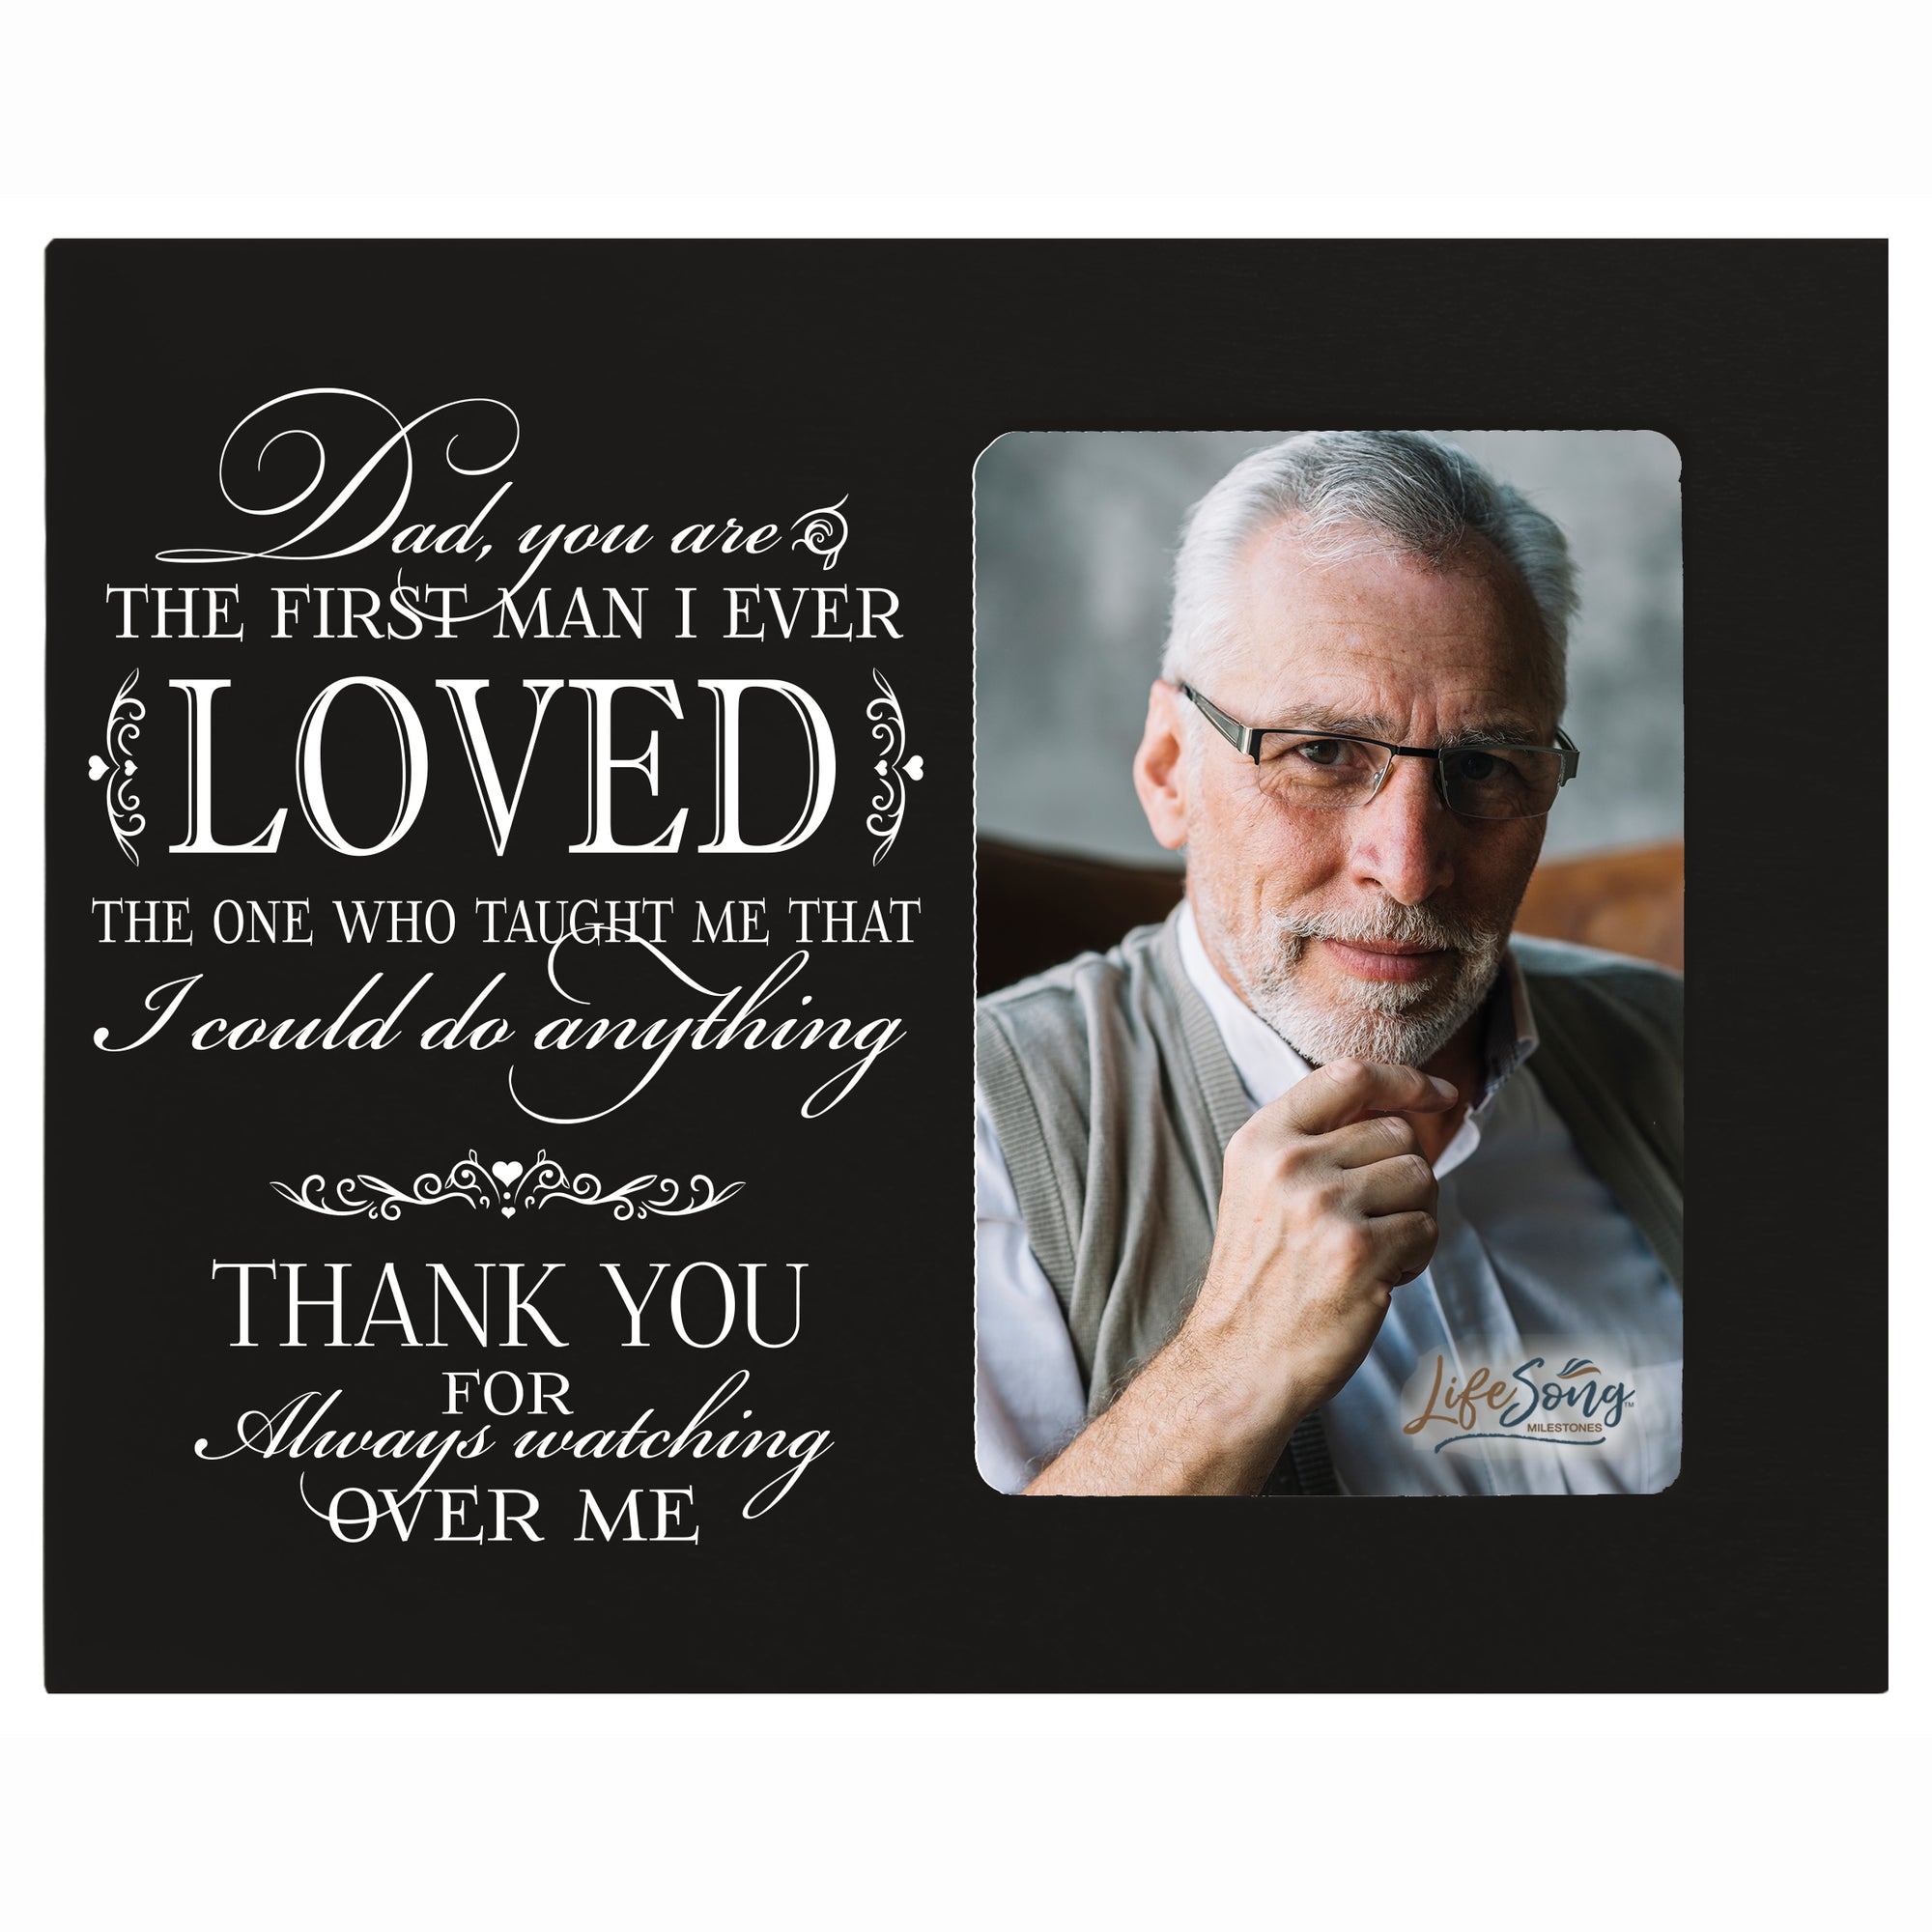 LifeSong Milestones Memorial Picture Frame - Bereavement Sympathy Gift for Loss of Loved One 8”x10” Photo Frame Holds 4”x6” Photo